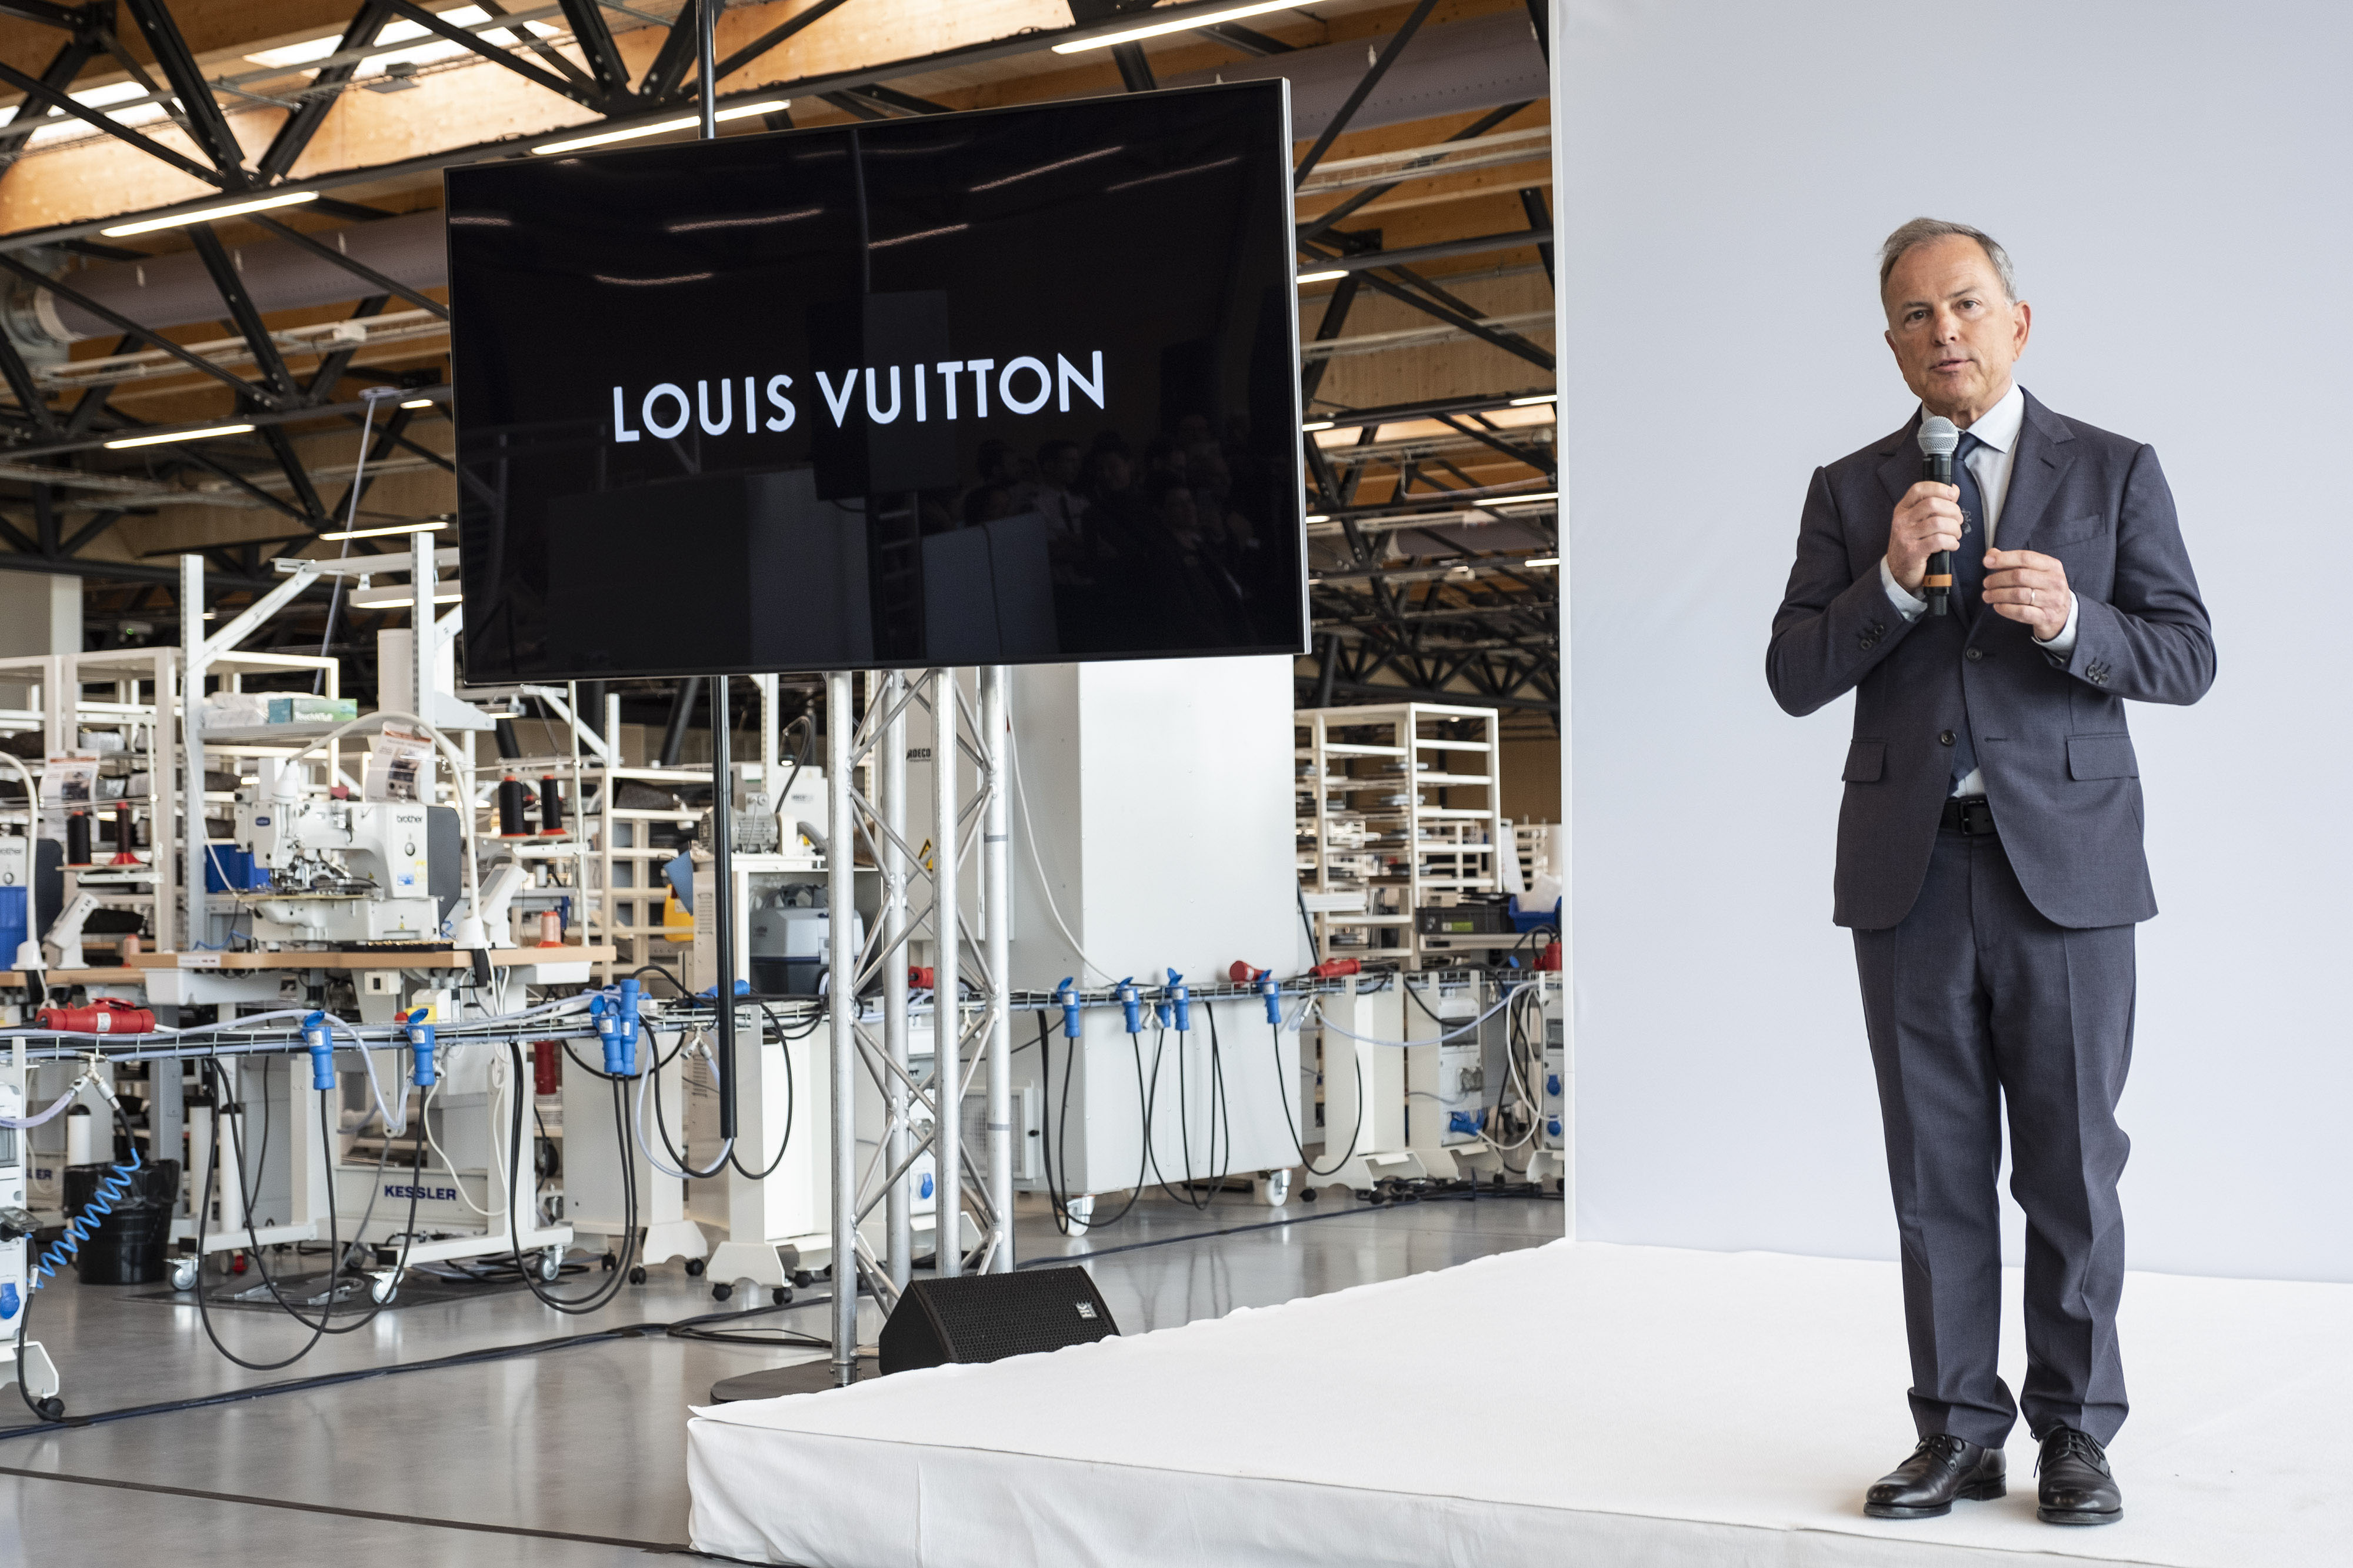 Louis Vuitton to Add 1,500 Jobs in France as Luxury Demand Booms